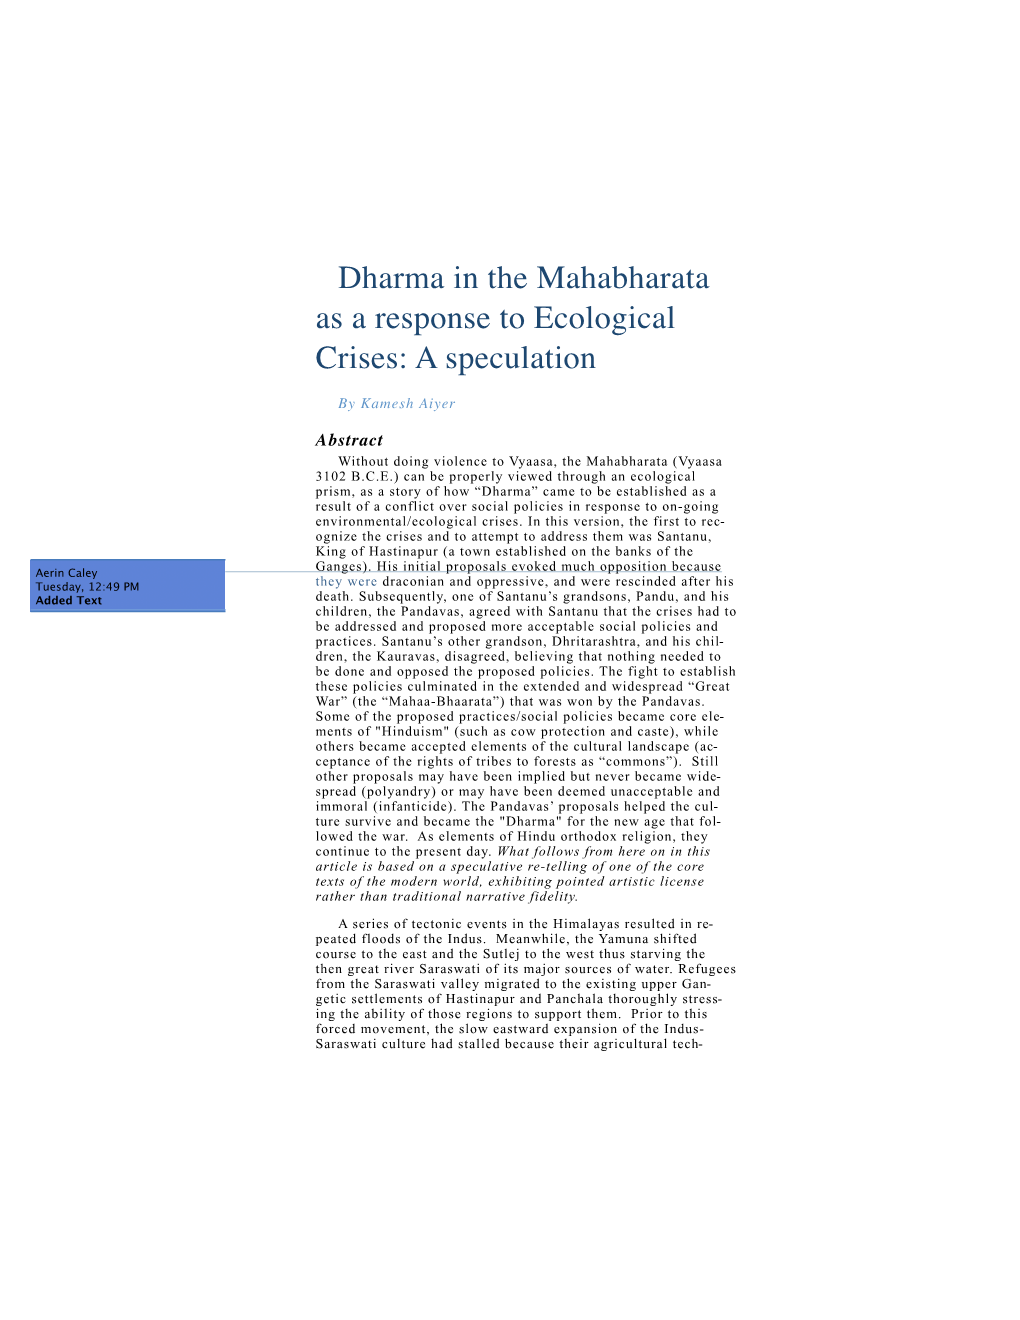 Dharma in the Mahabharata As a Response to Ecological Crises: a Speculation